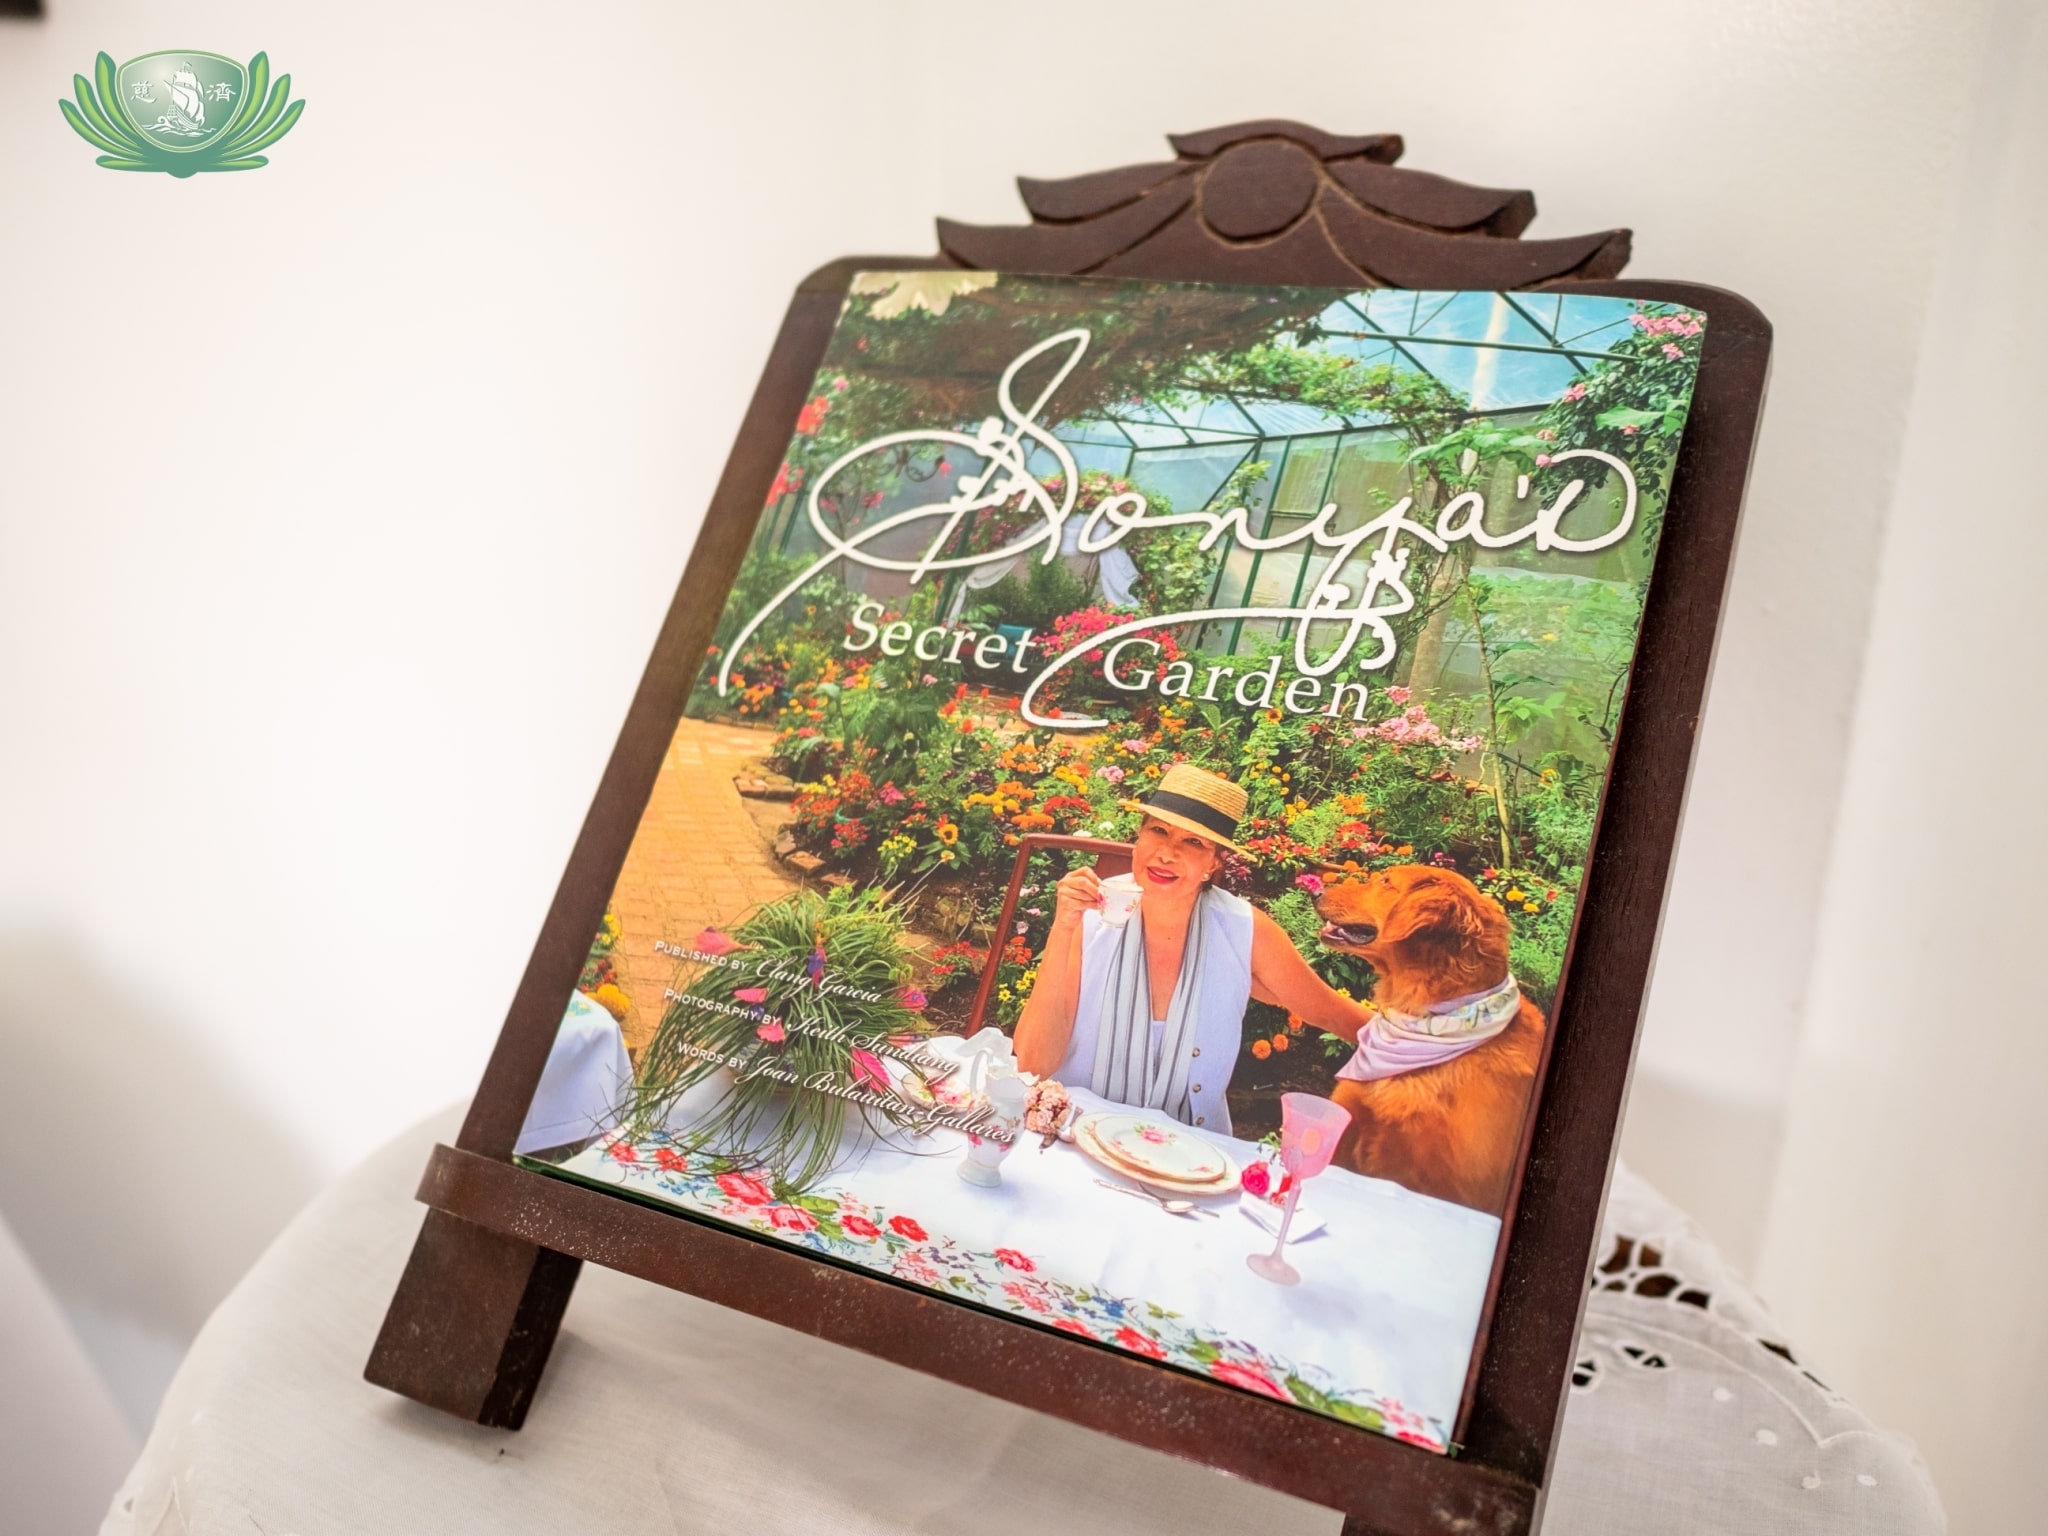 Sonya's Secret Garden Book available in her guest rooms.【Photo by Daniel Lazar】